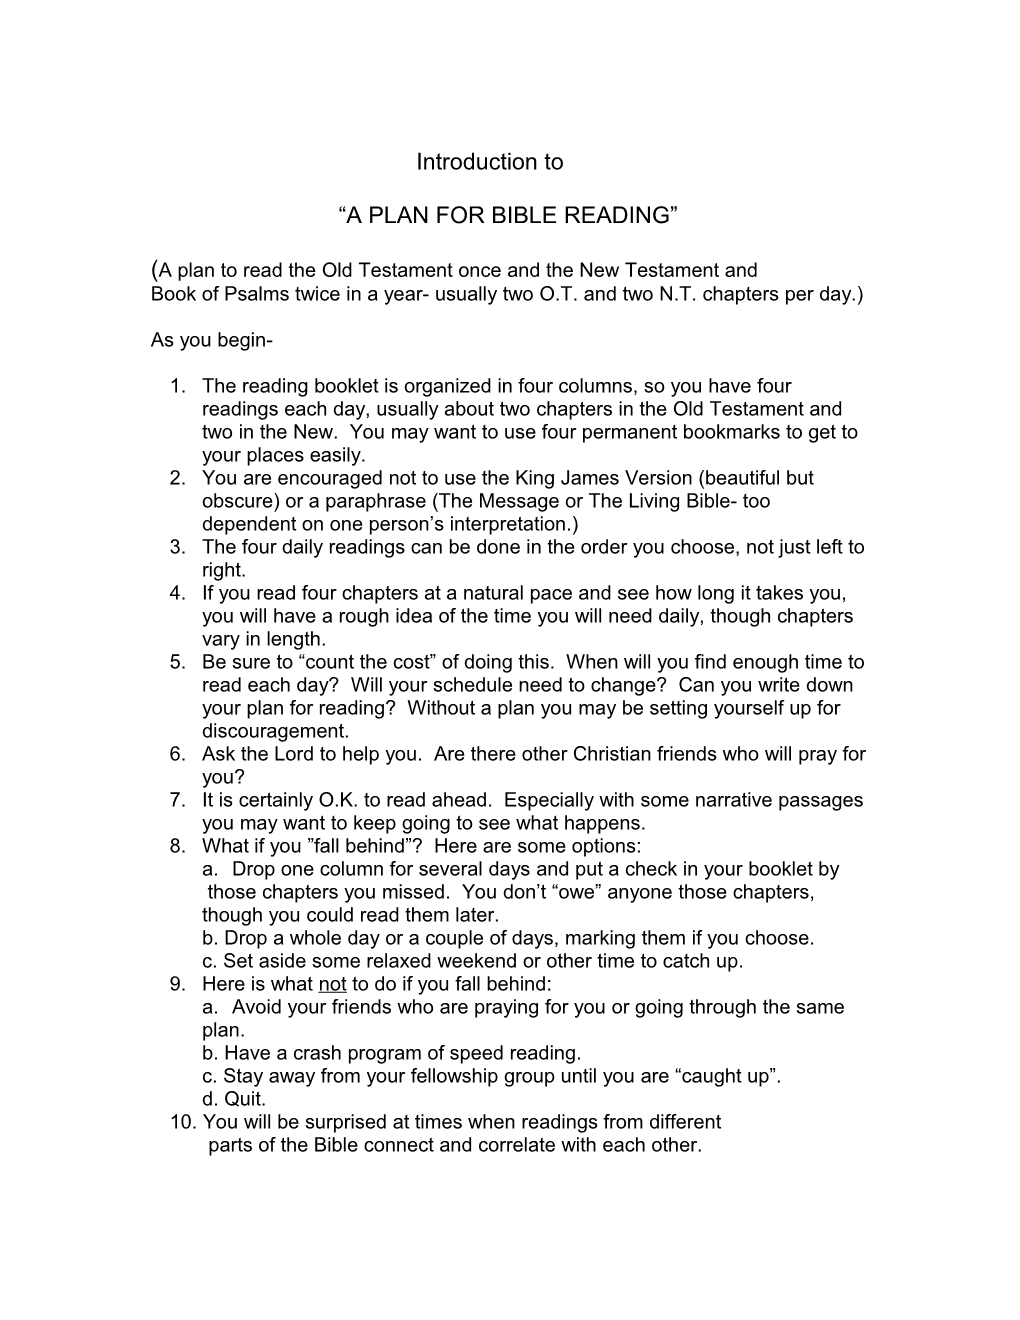 A Plan for Bible Reading